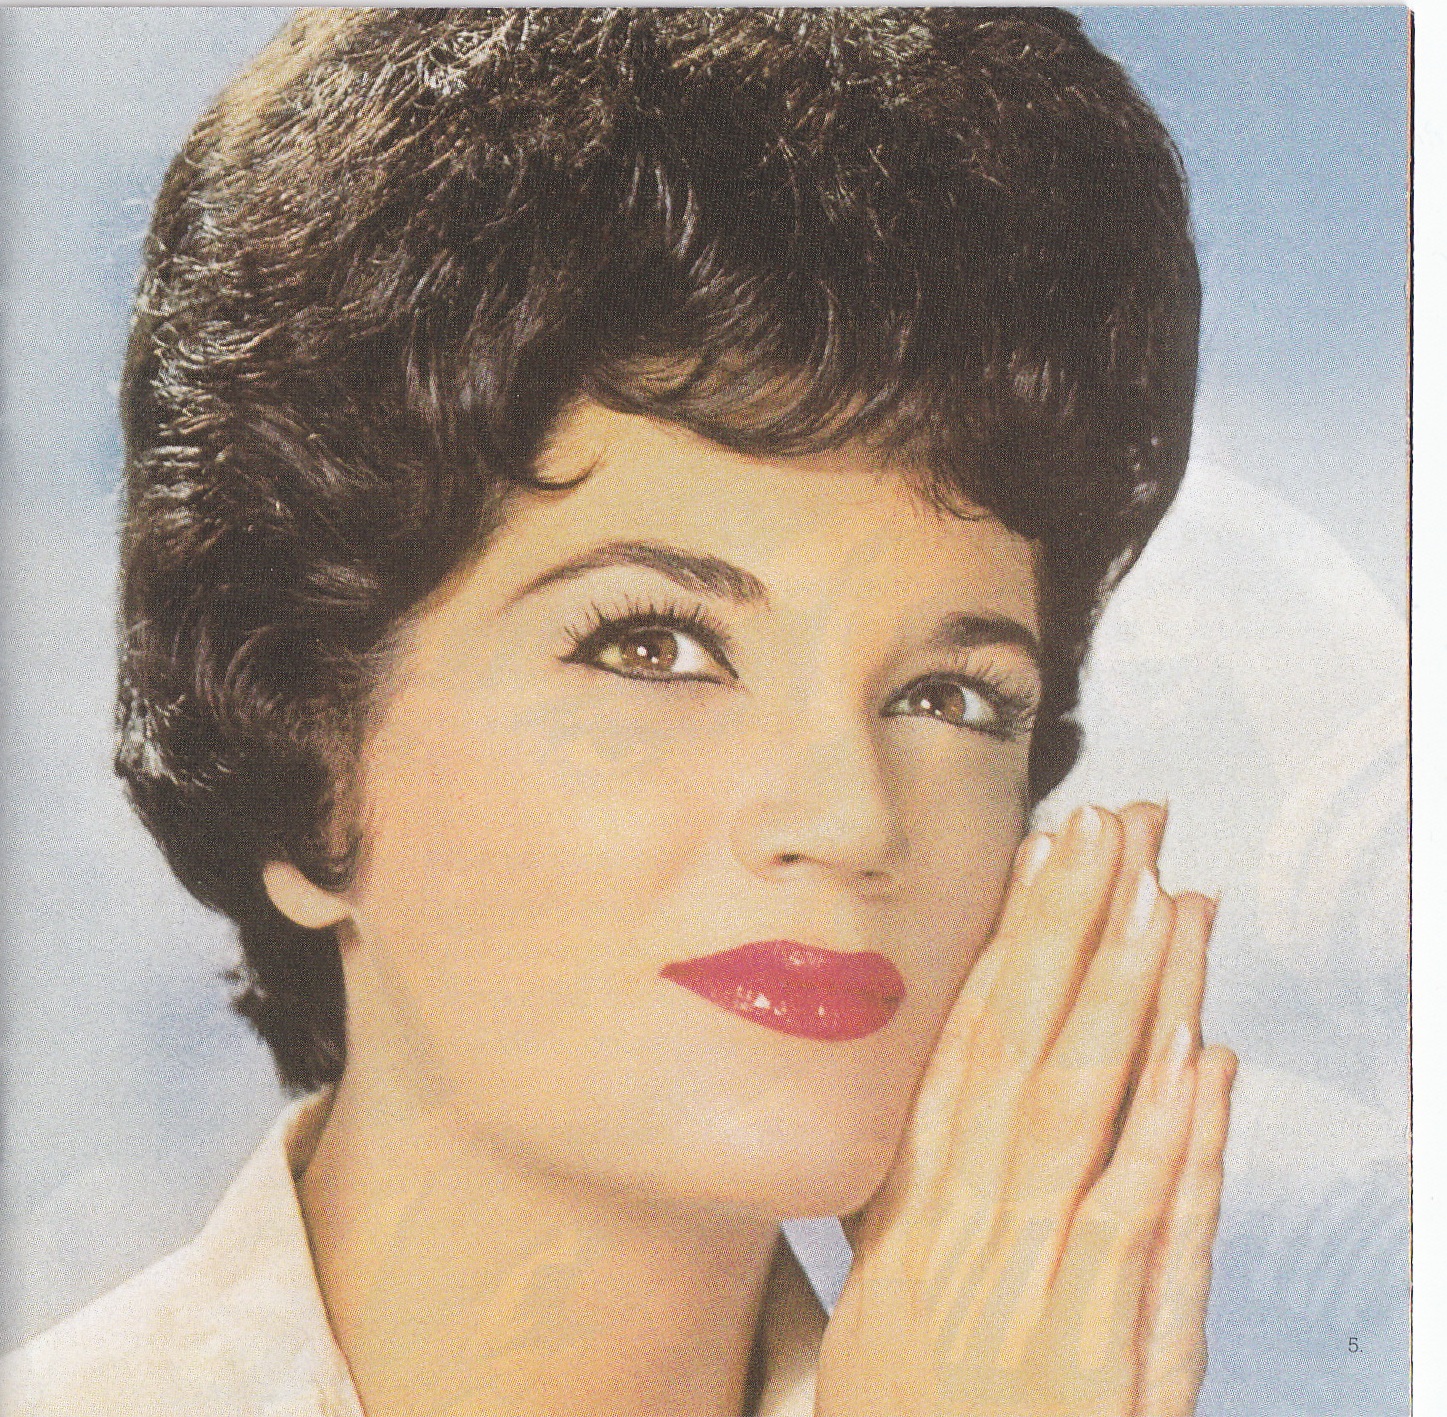 Connie Francis - Gold